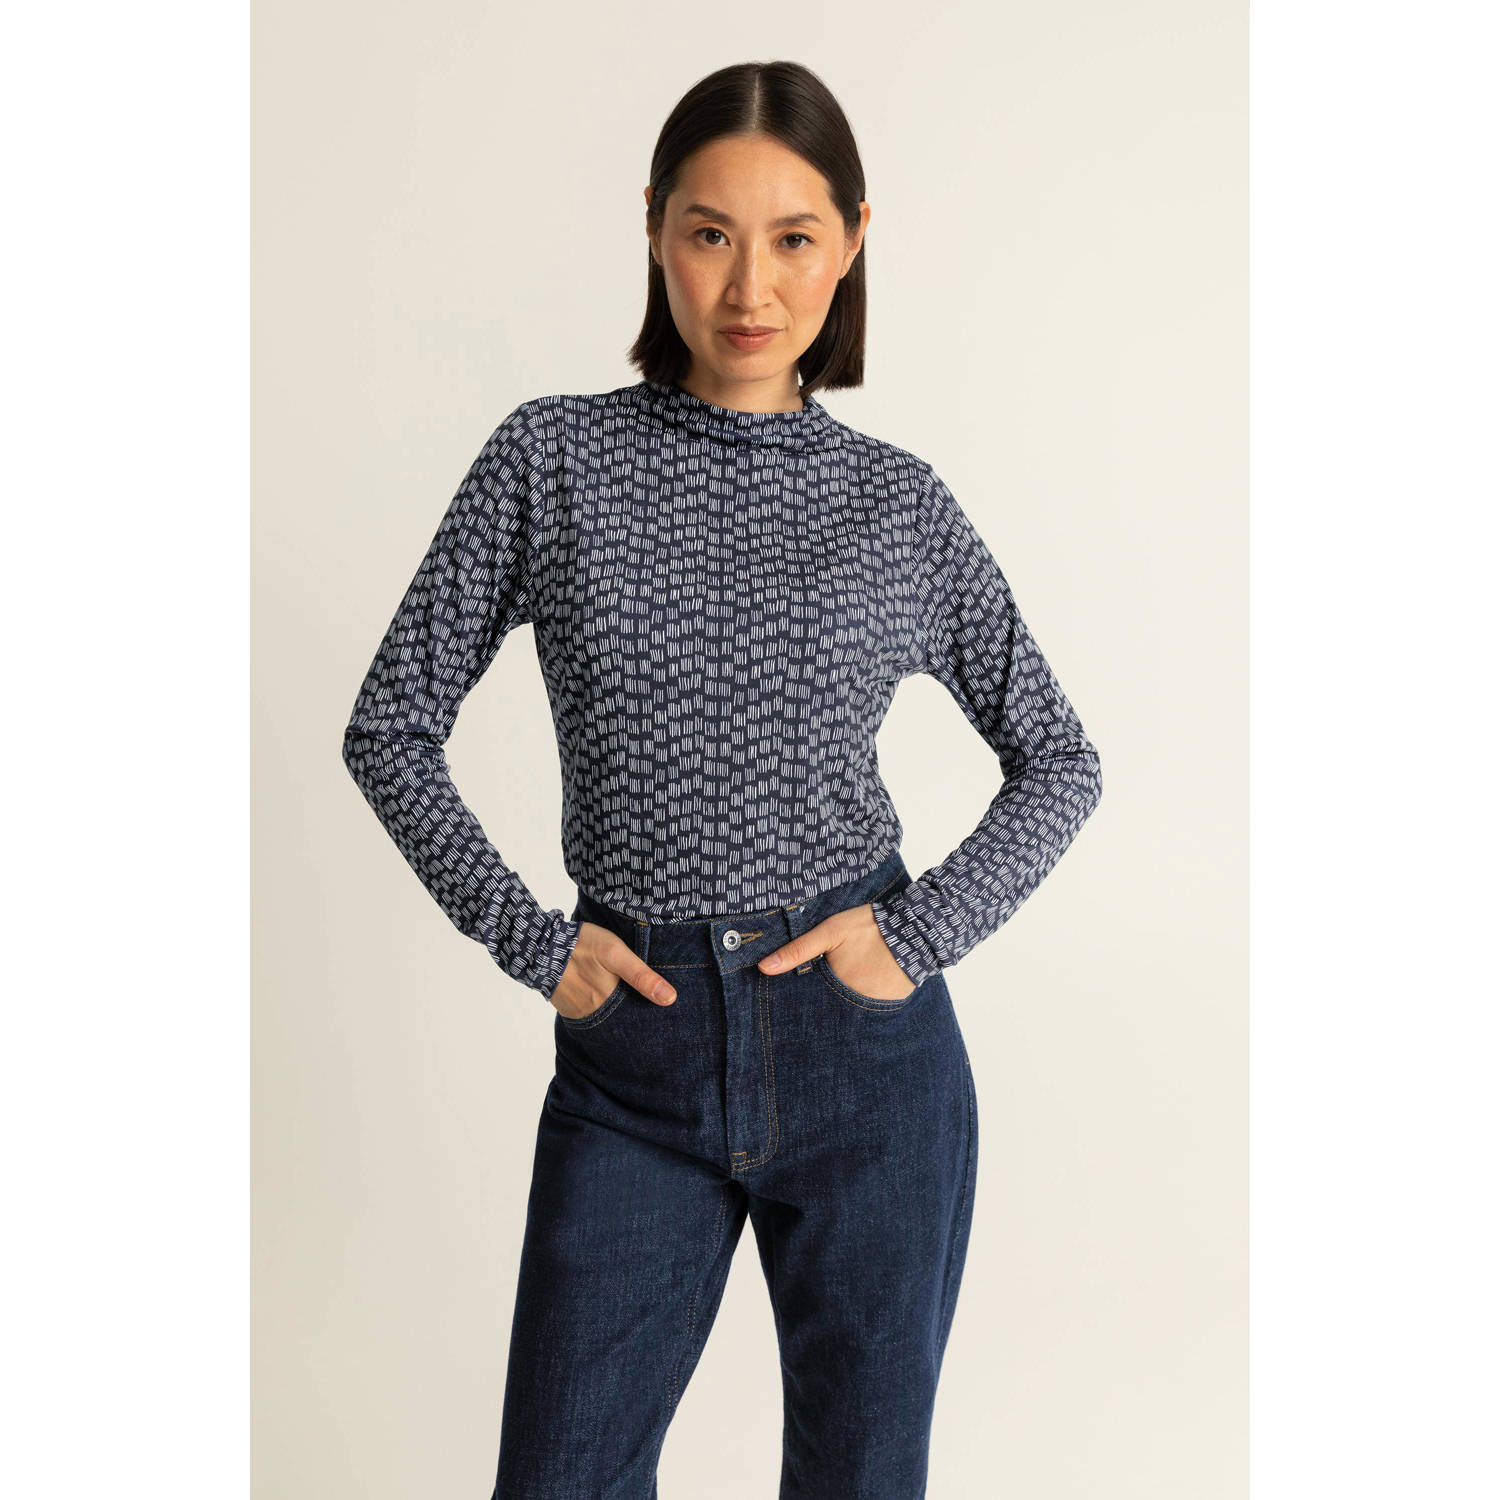 Expresso jersey top donkerblauw